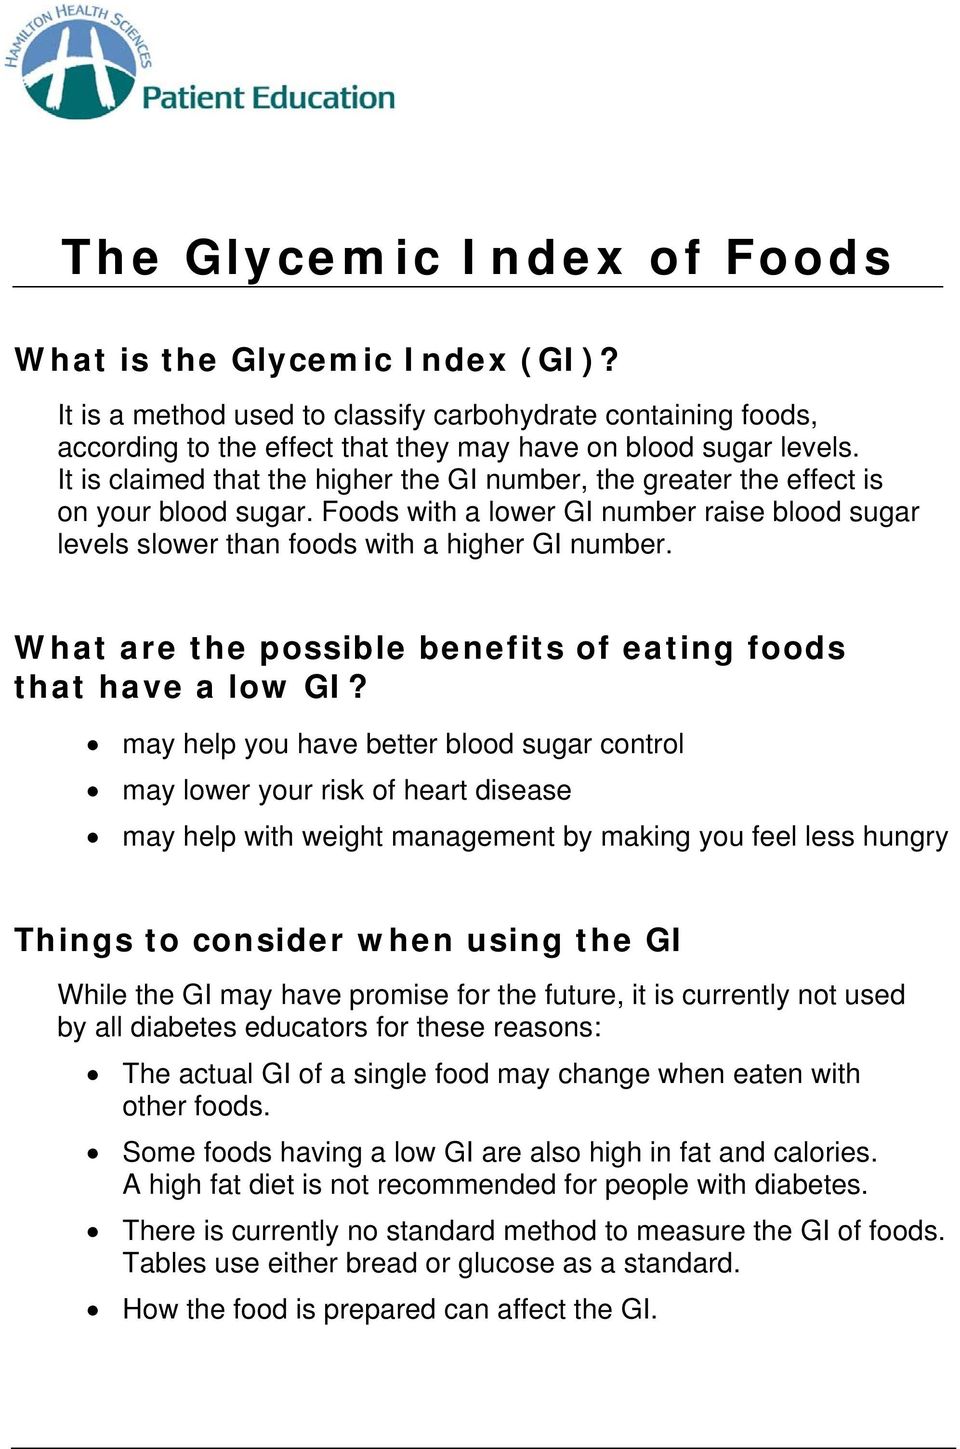 What are the possible benefits of eating foods that have a low GI?